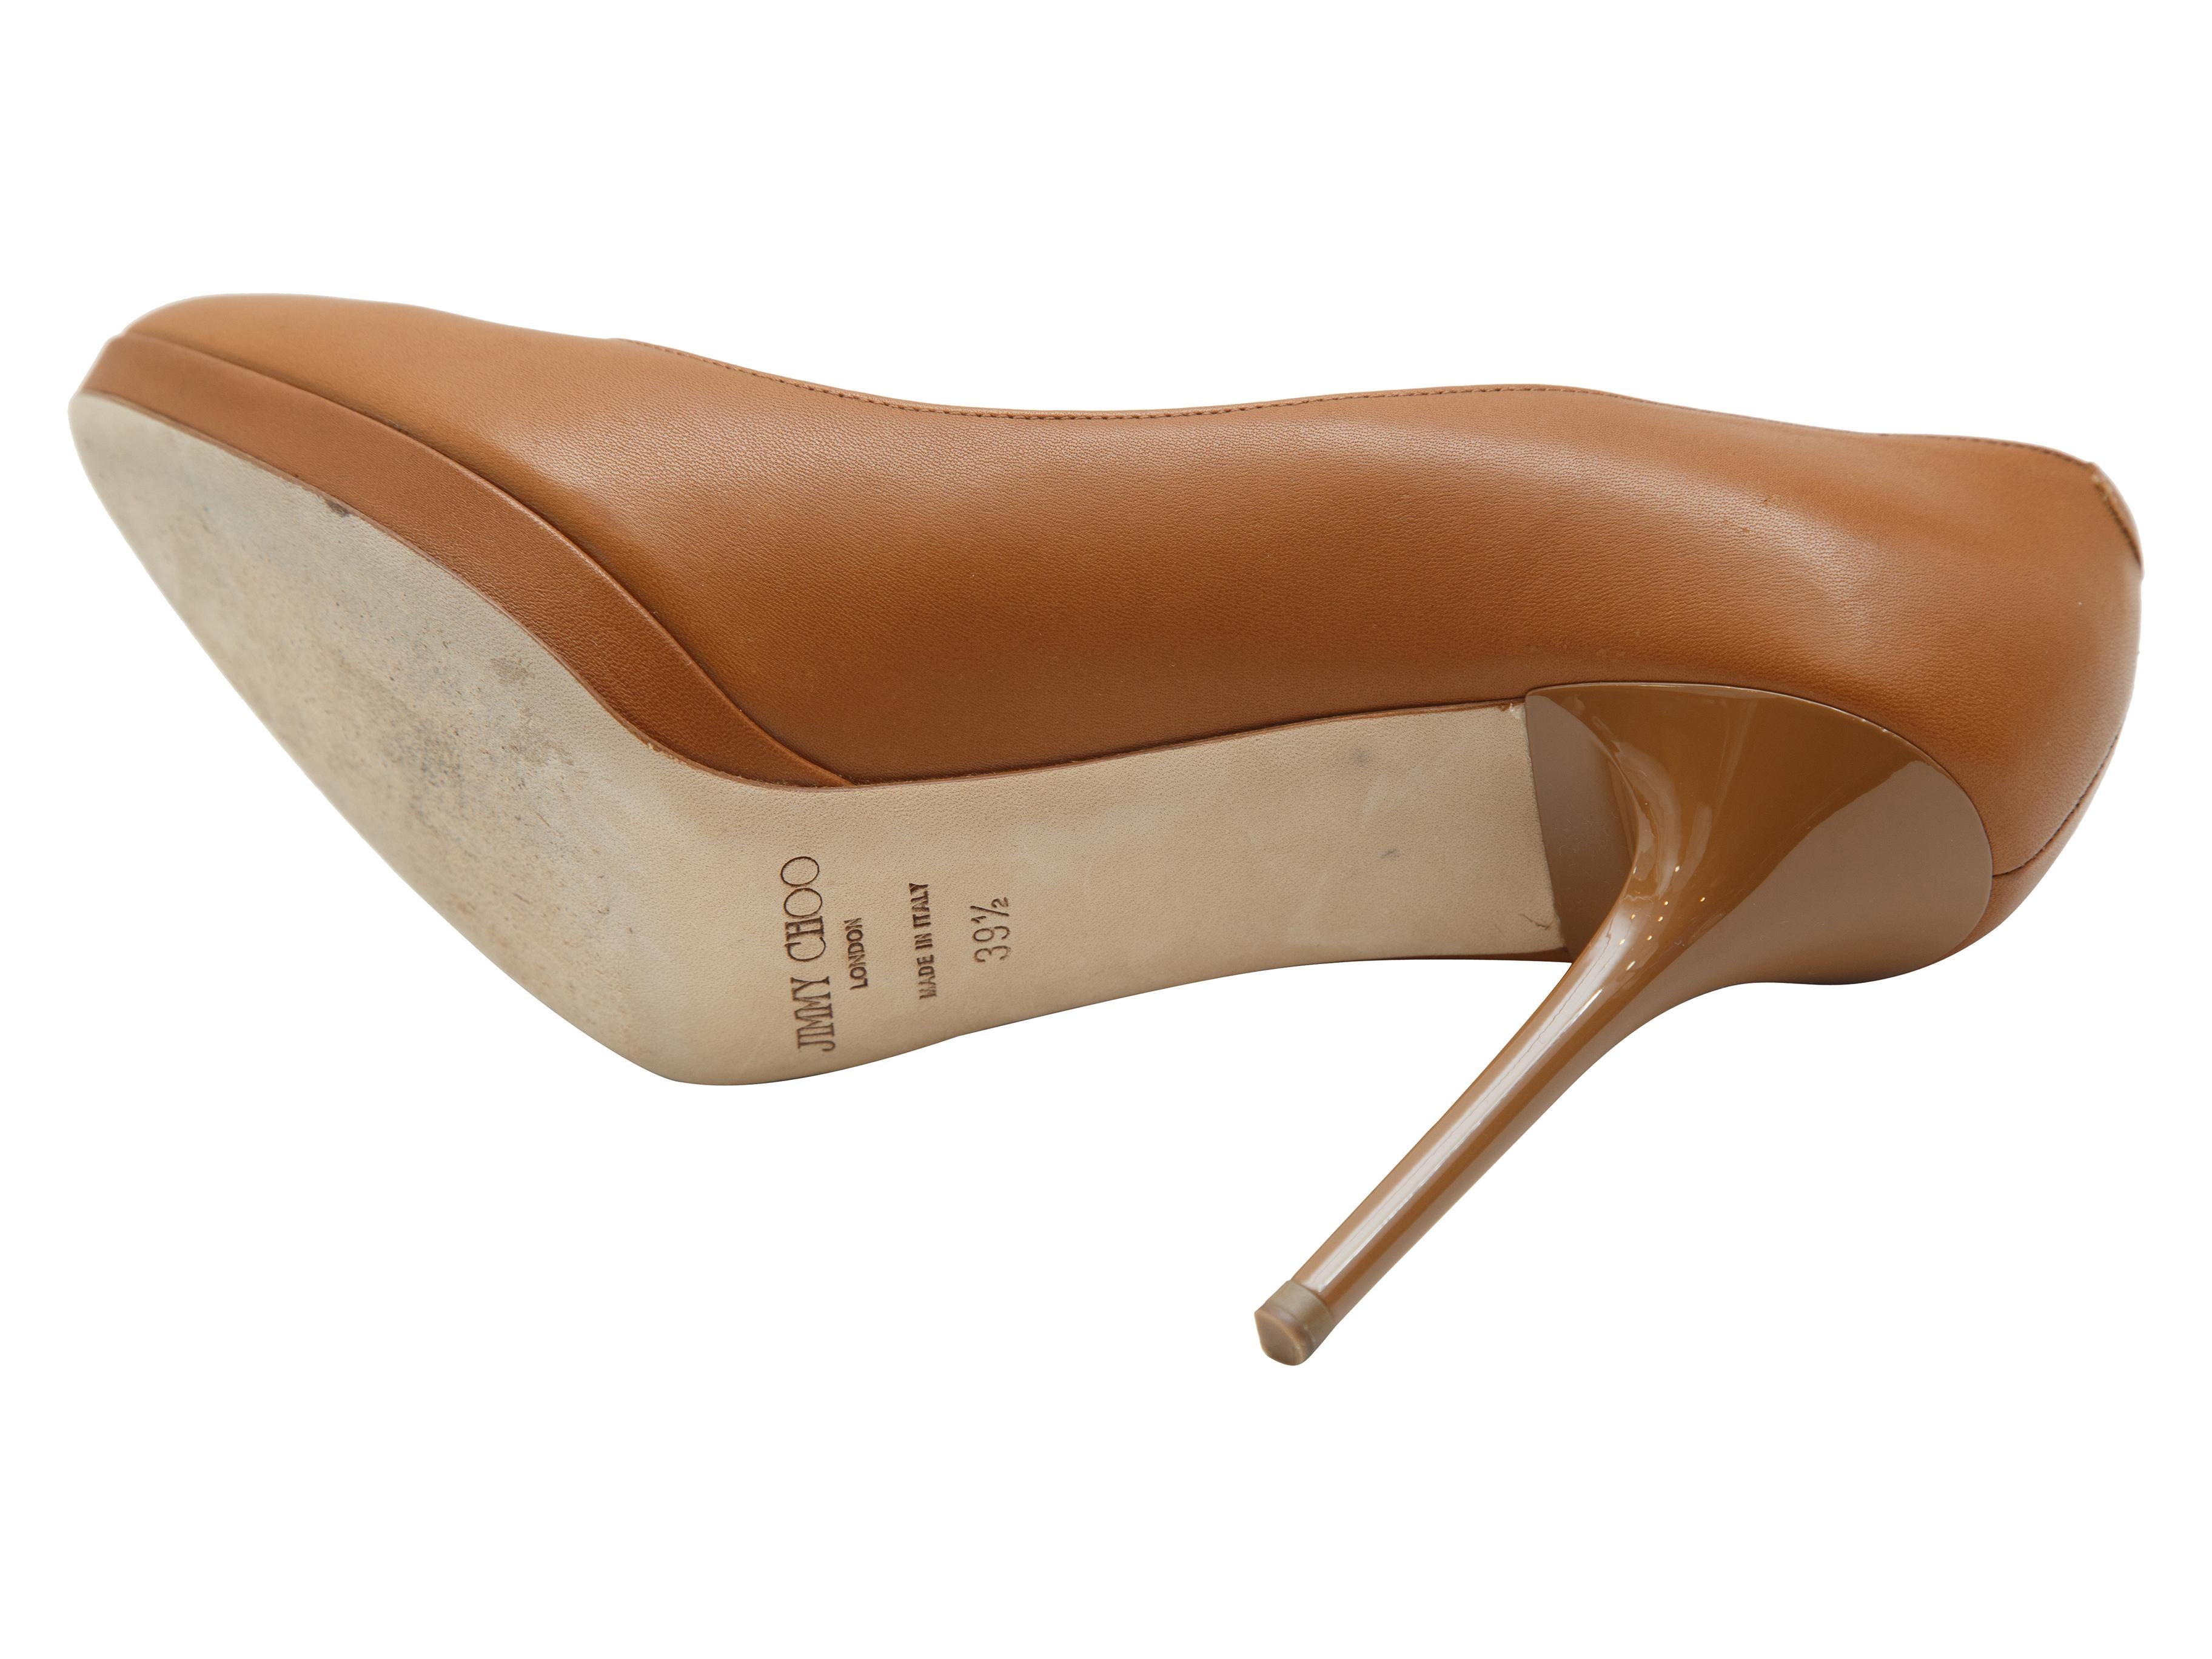 Product details:  Tan leather pumps by Jimmy Choo.  Round toe.  Low platform.  Slip-on style.  4